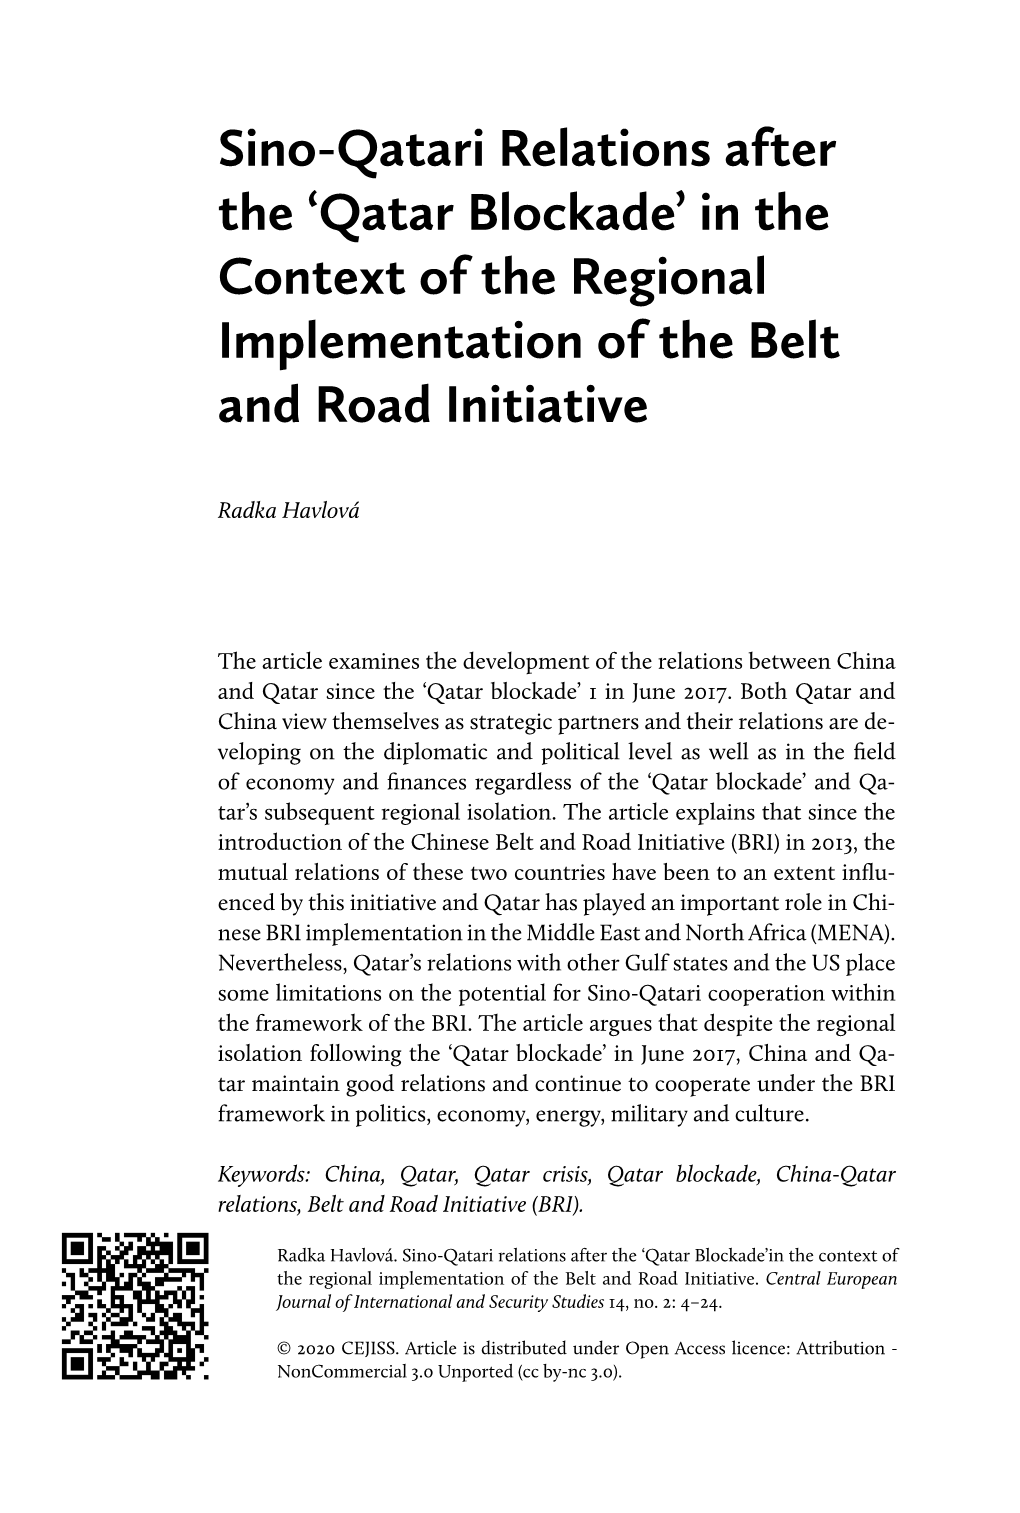 Qatar Blockade’ in the Context of the Regional Implementation of the Belt and Road Initiative